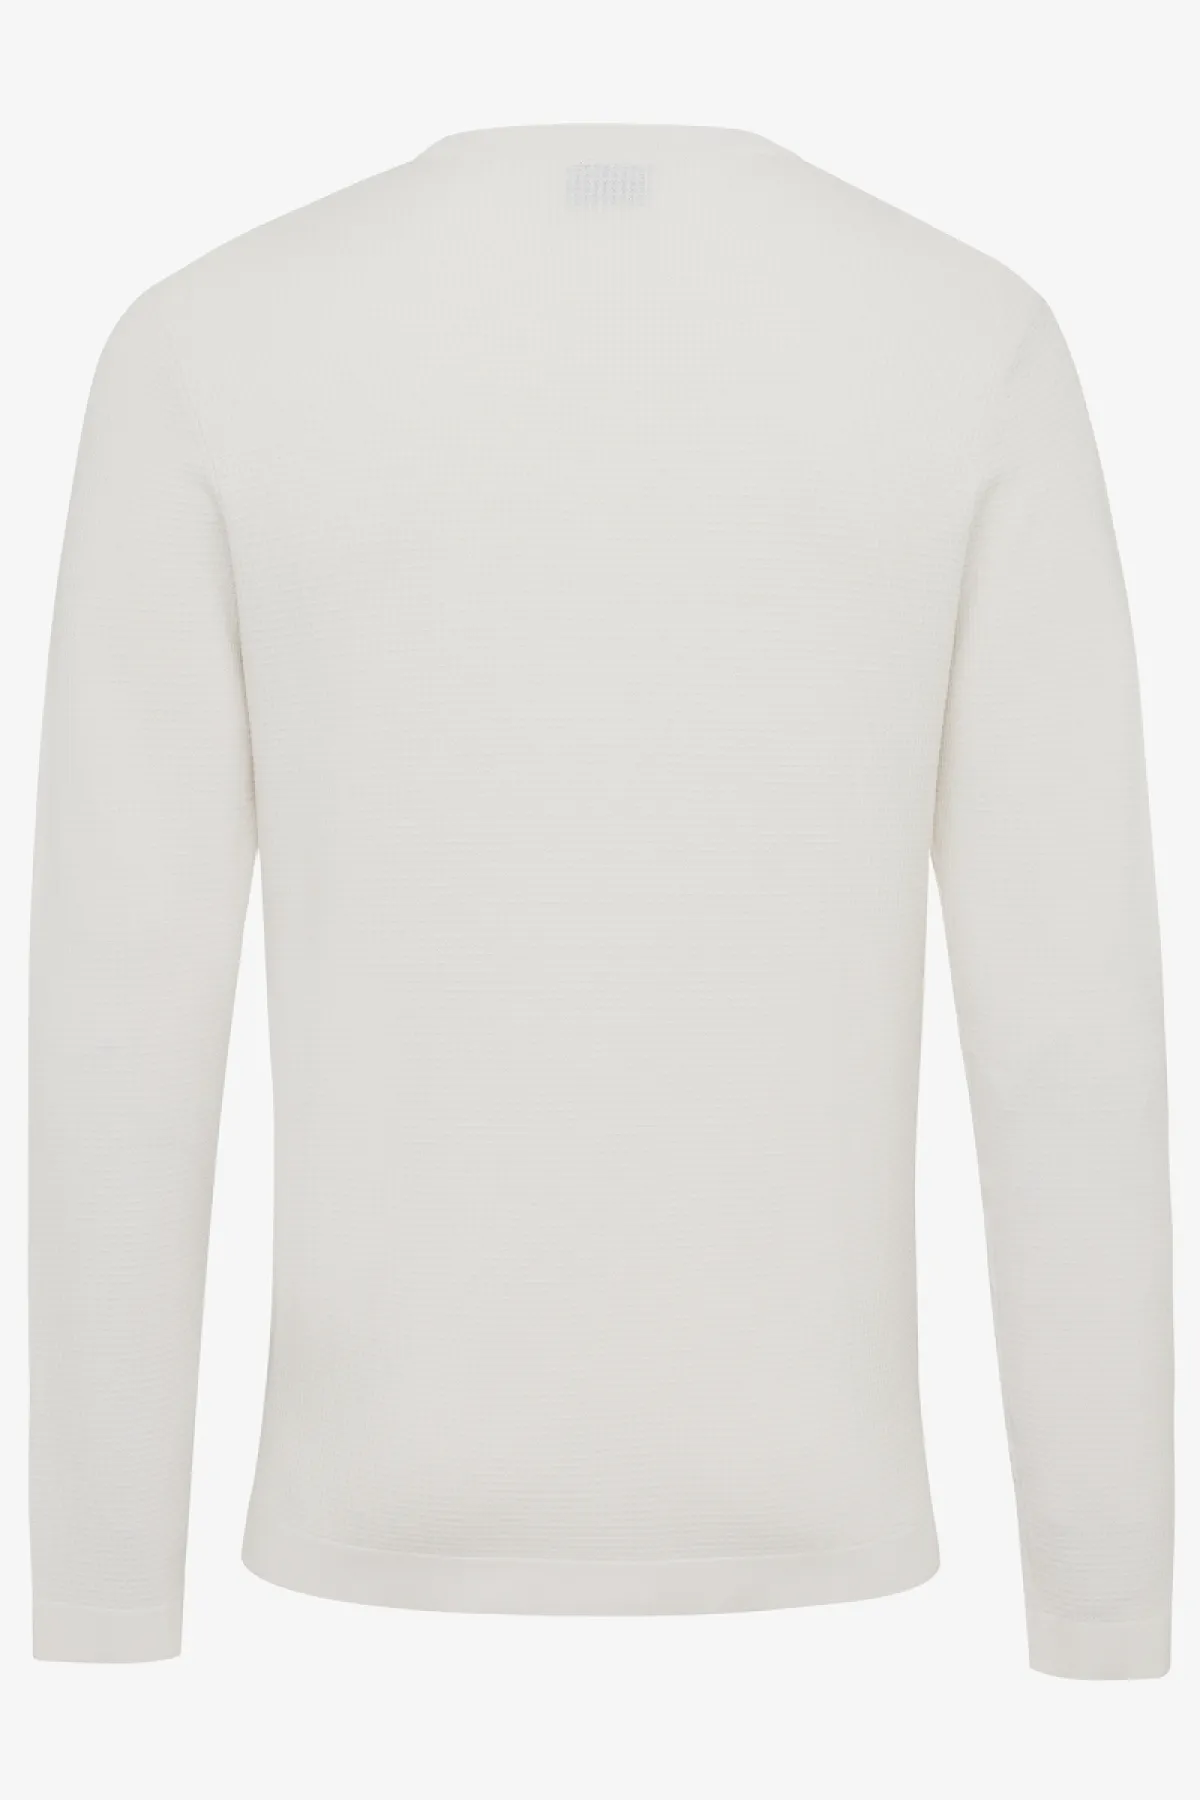 Cool dry round neck off-white